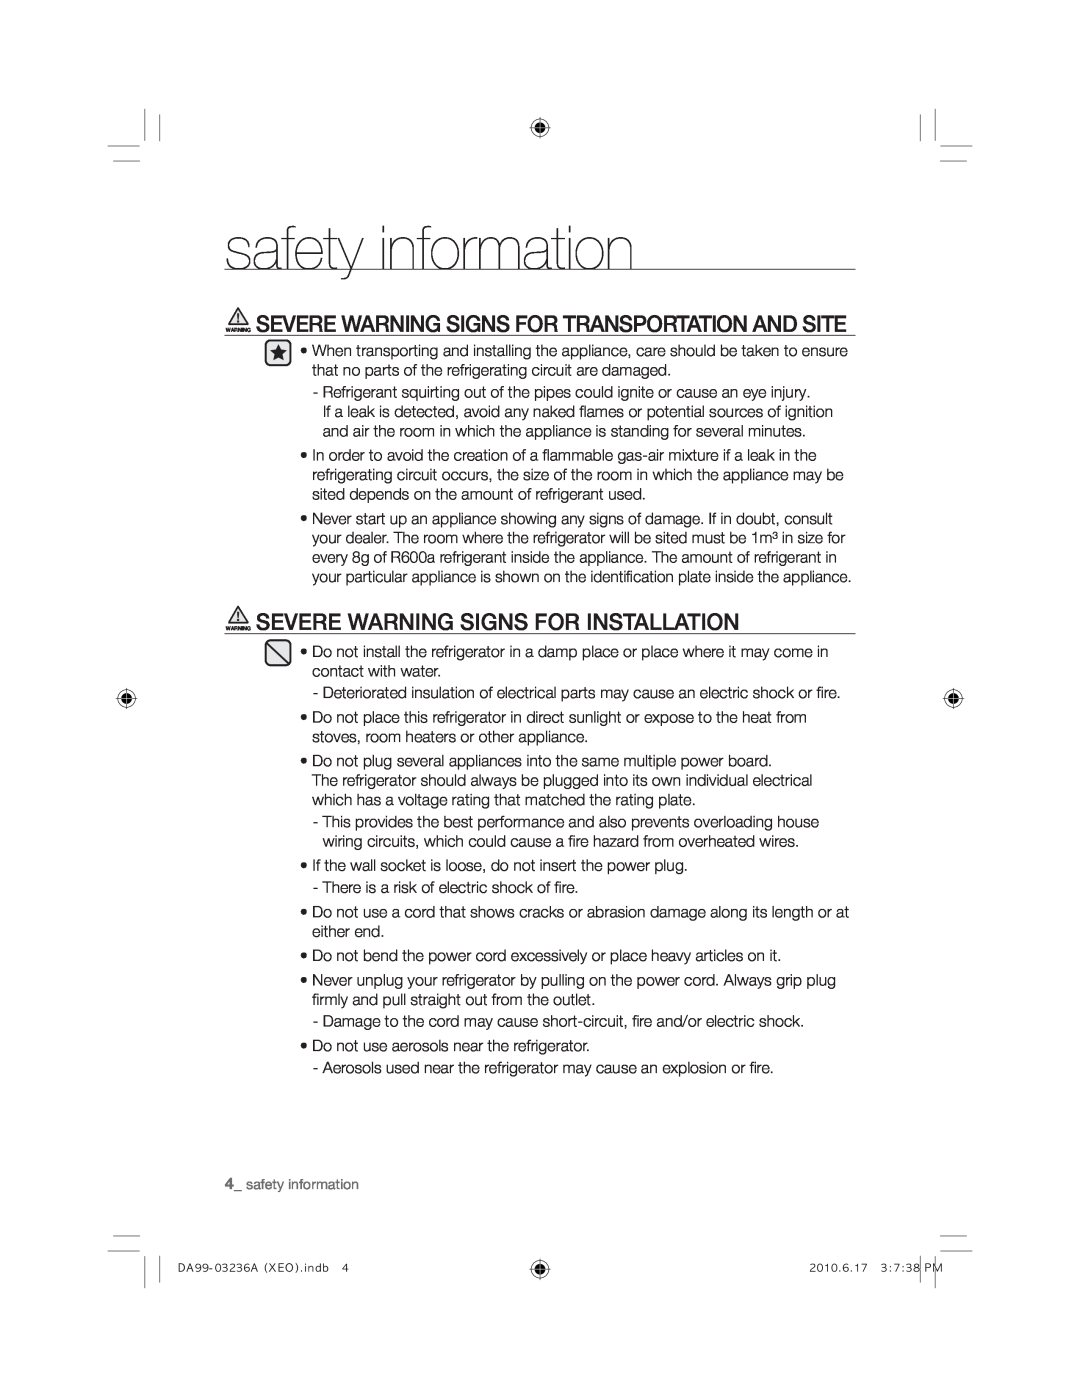 Samsung RL43TGCIH1/XEF, RL39TRCSW1/XEF manual Warning Severe Warning Signs For Transportation And Site, safety information 